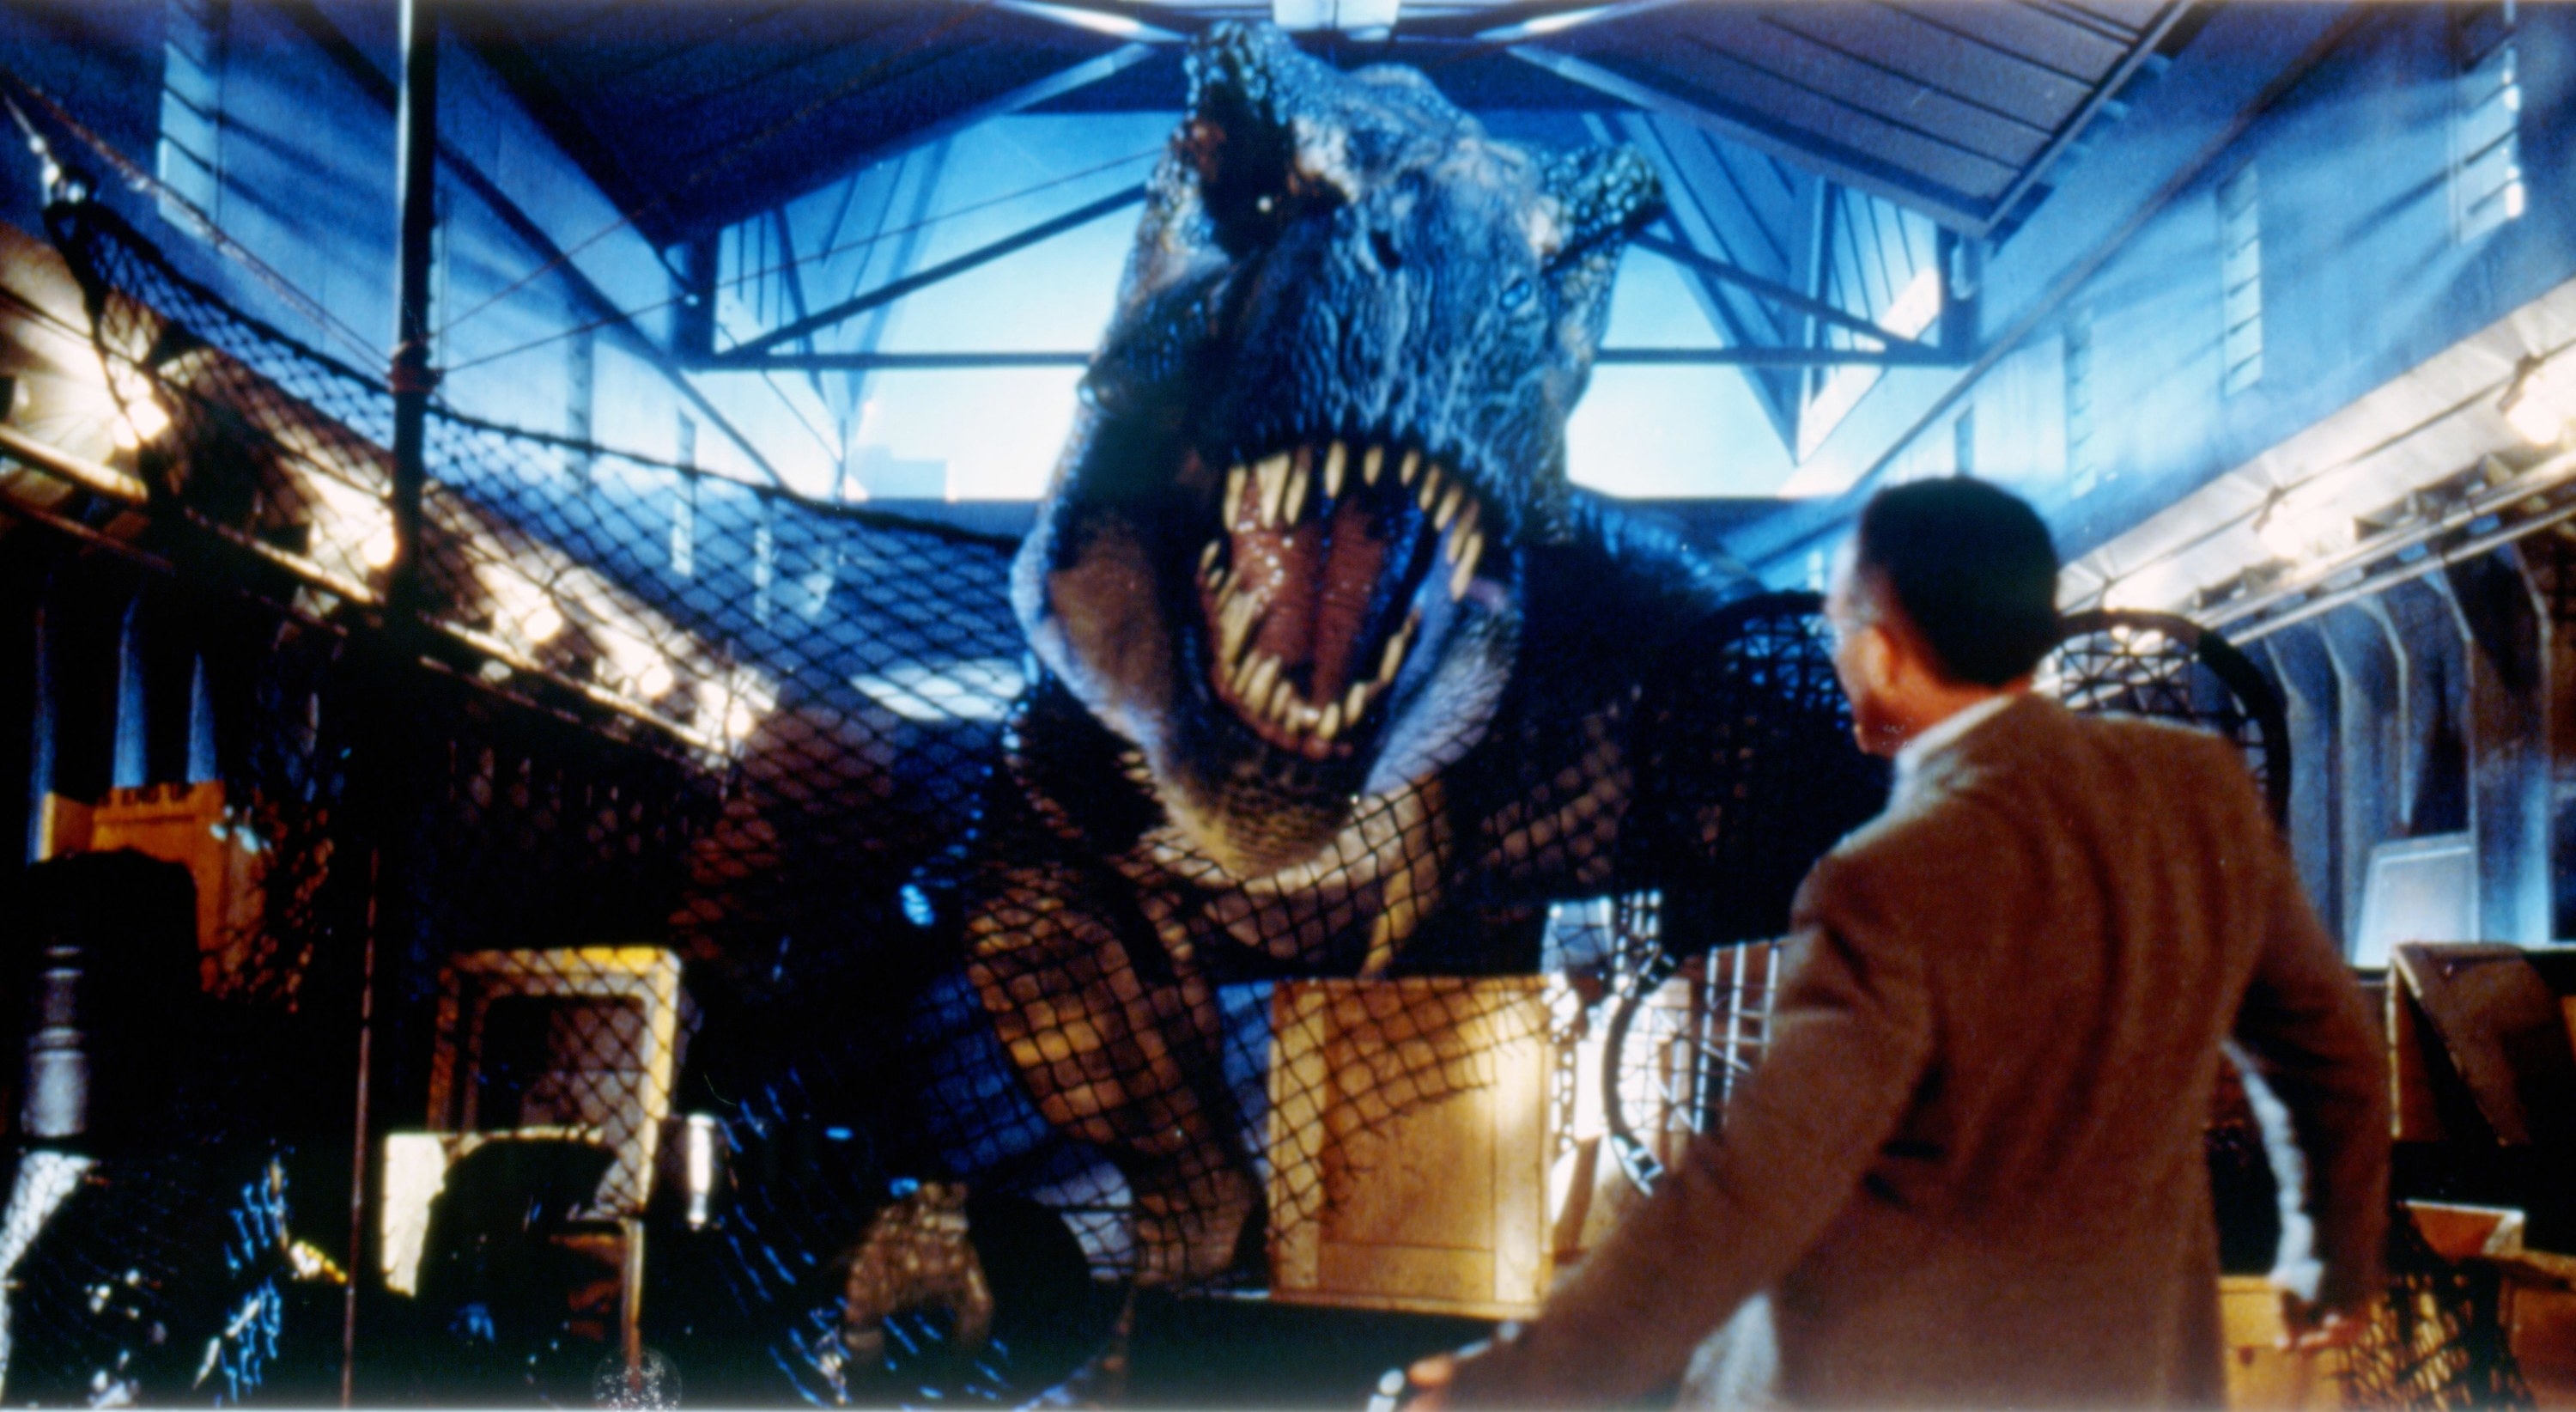 A tyrannosaurus rex roars at someone in a warehouse